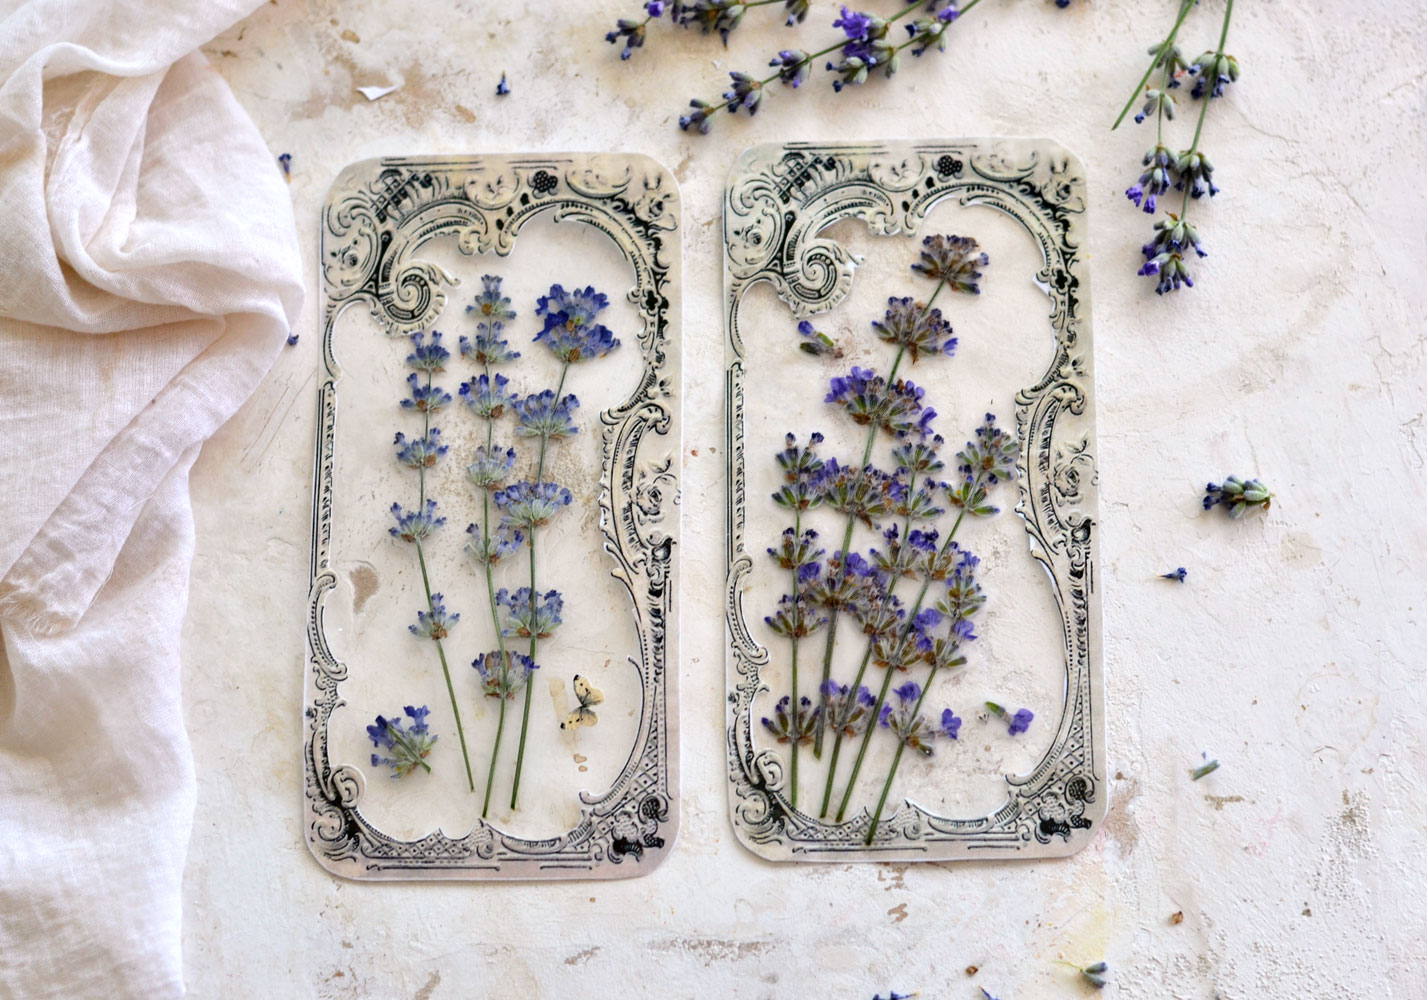 What to do with pressed flowers